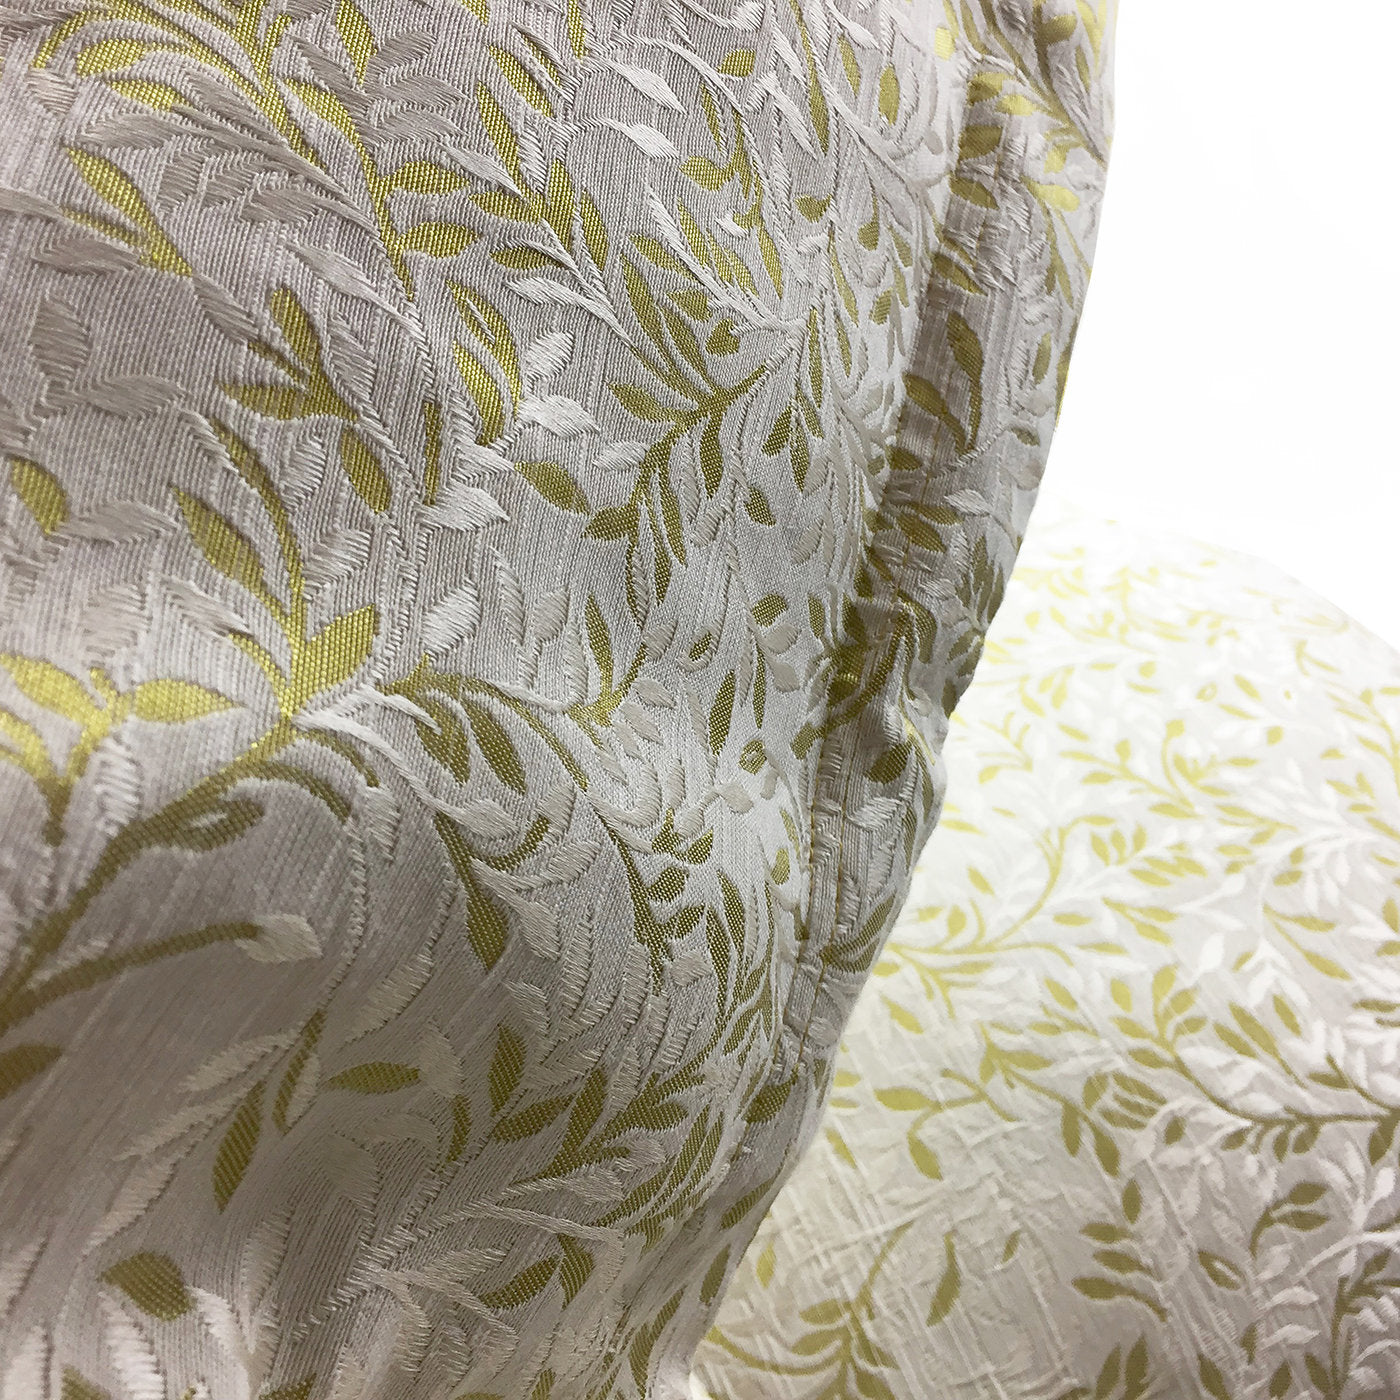 Set of 2 White and Gold Throw Cushions  - Alternative view 2